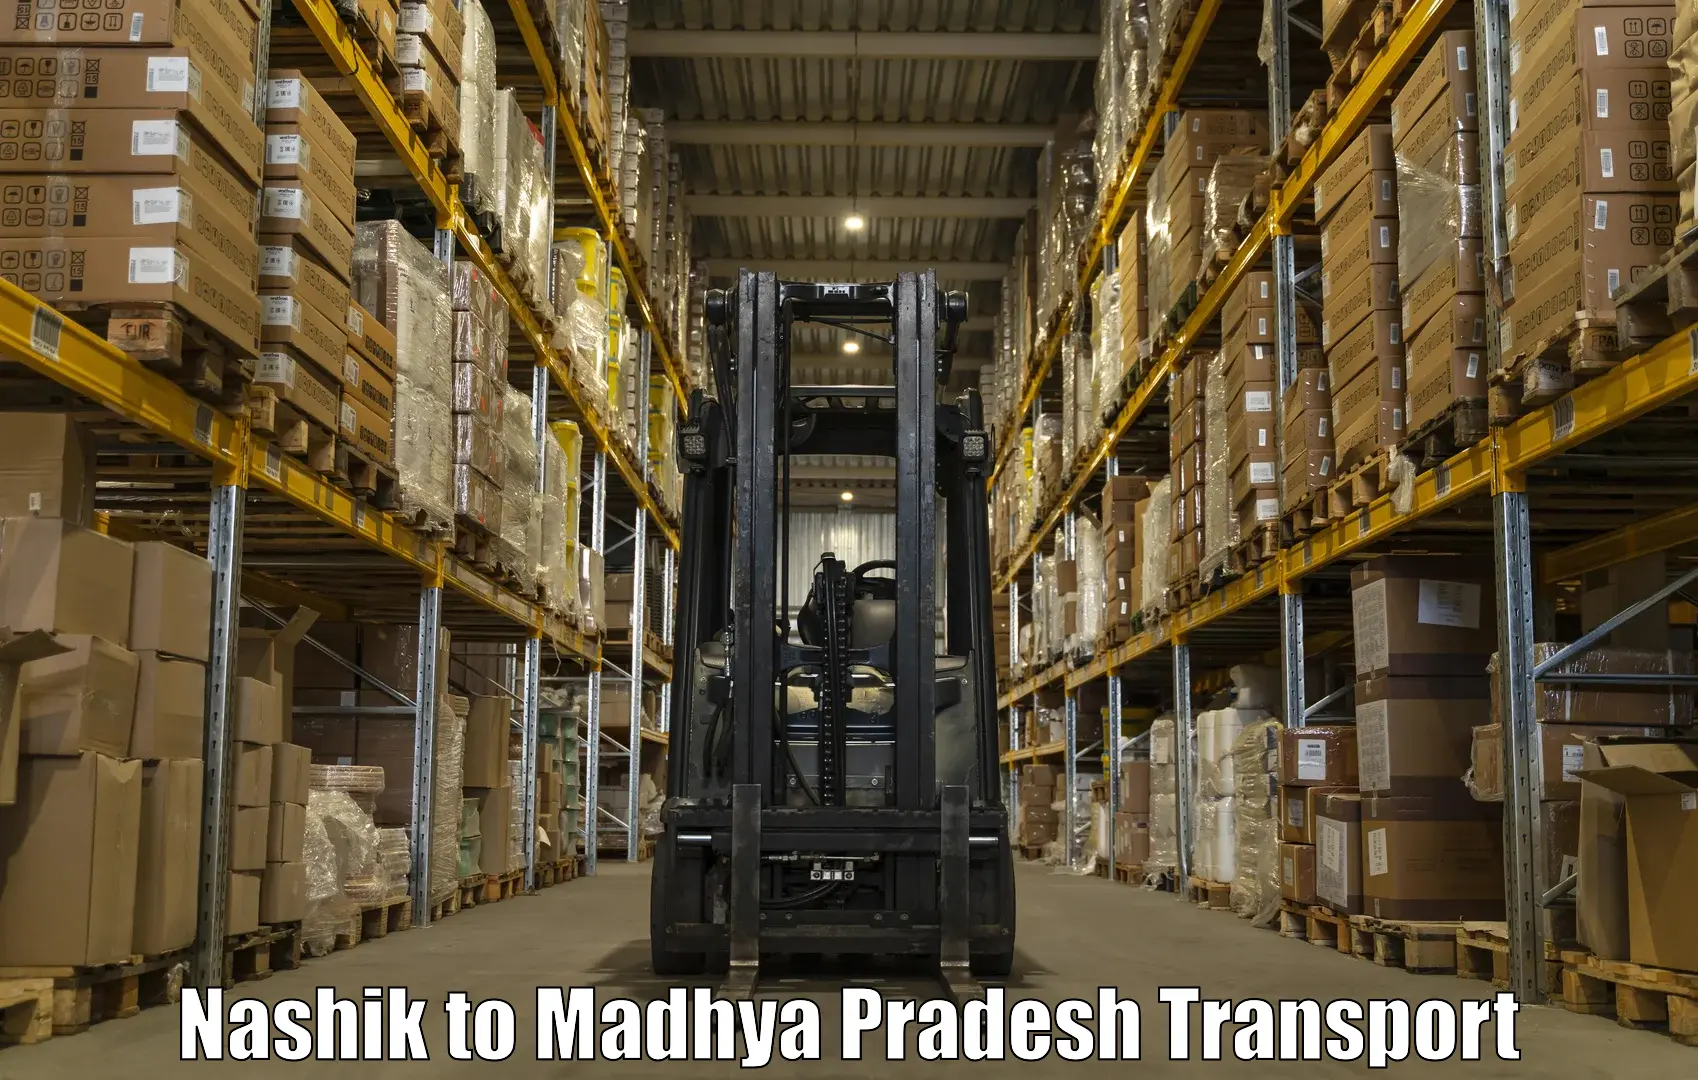 Truck transport companies in India in Nashik to Ghugri